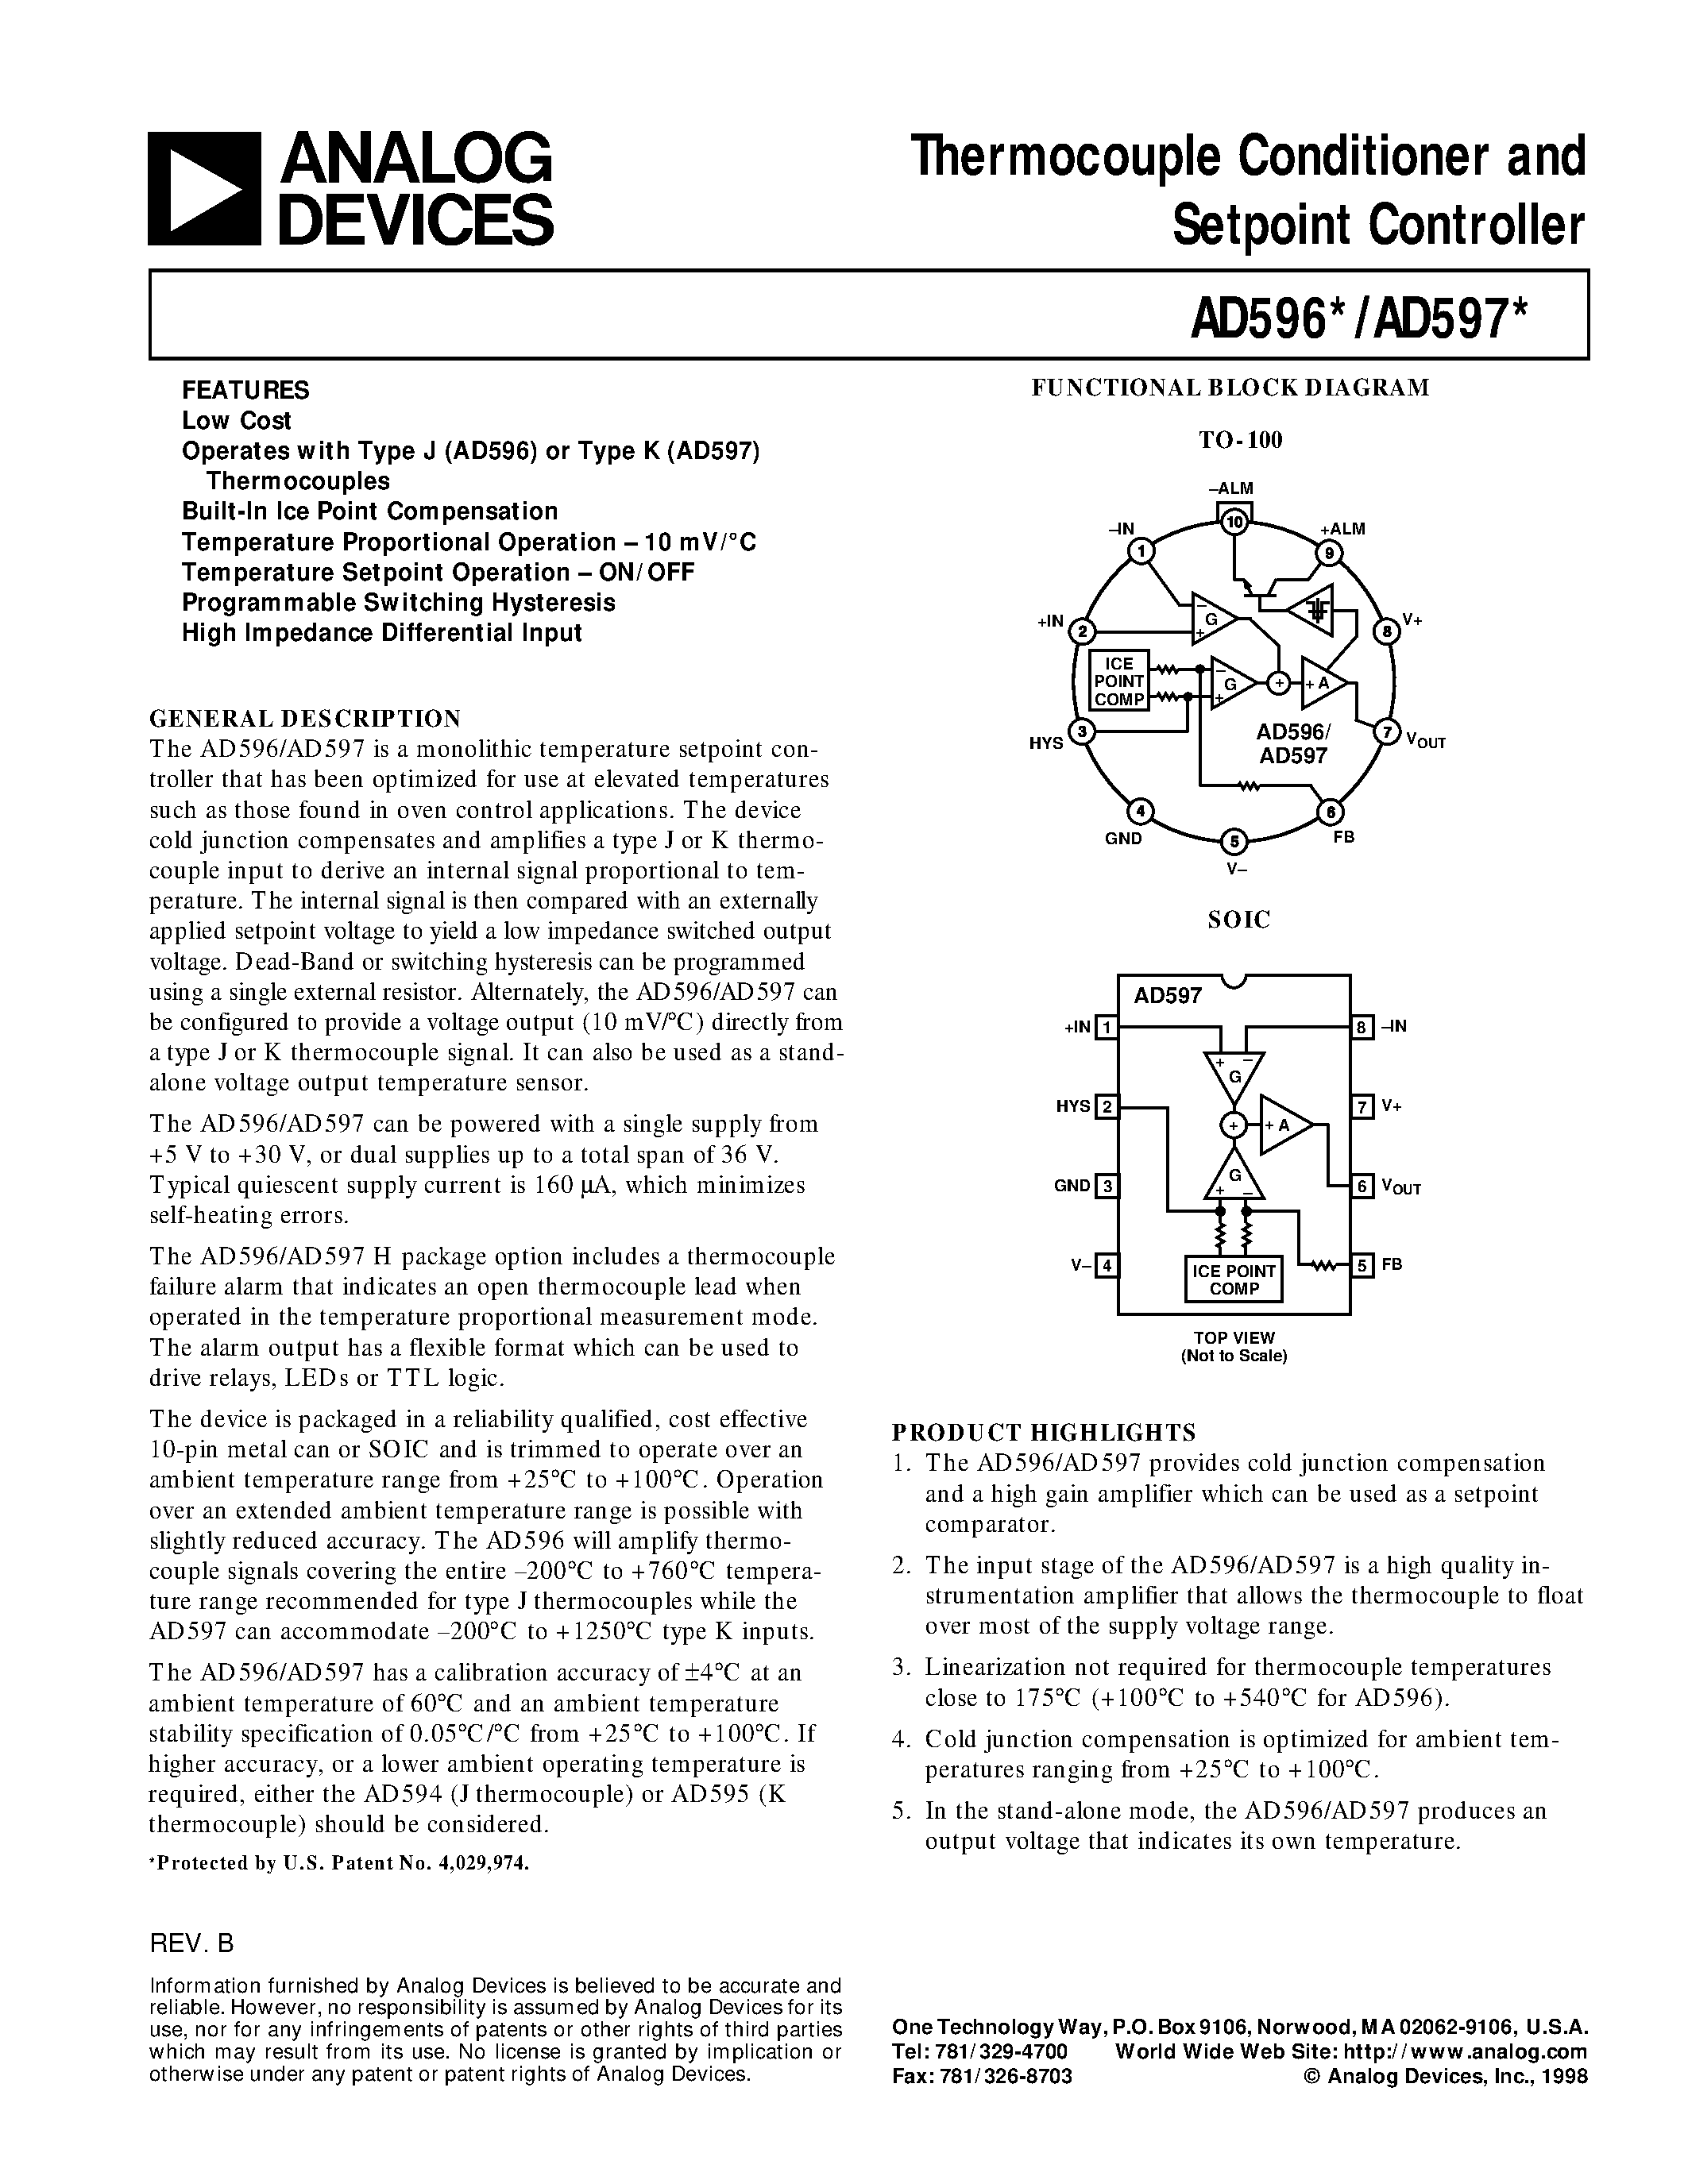 Datasheet AD596AH - Thermocouple Conditioner and Setpoint Controller page 1